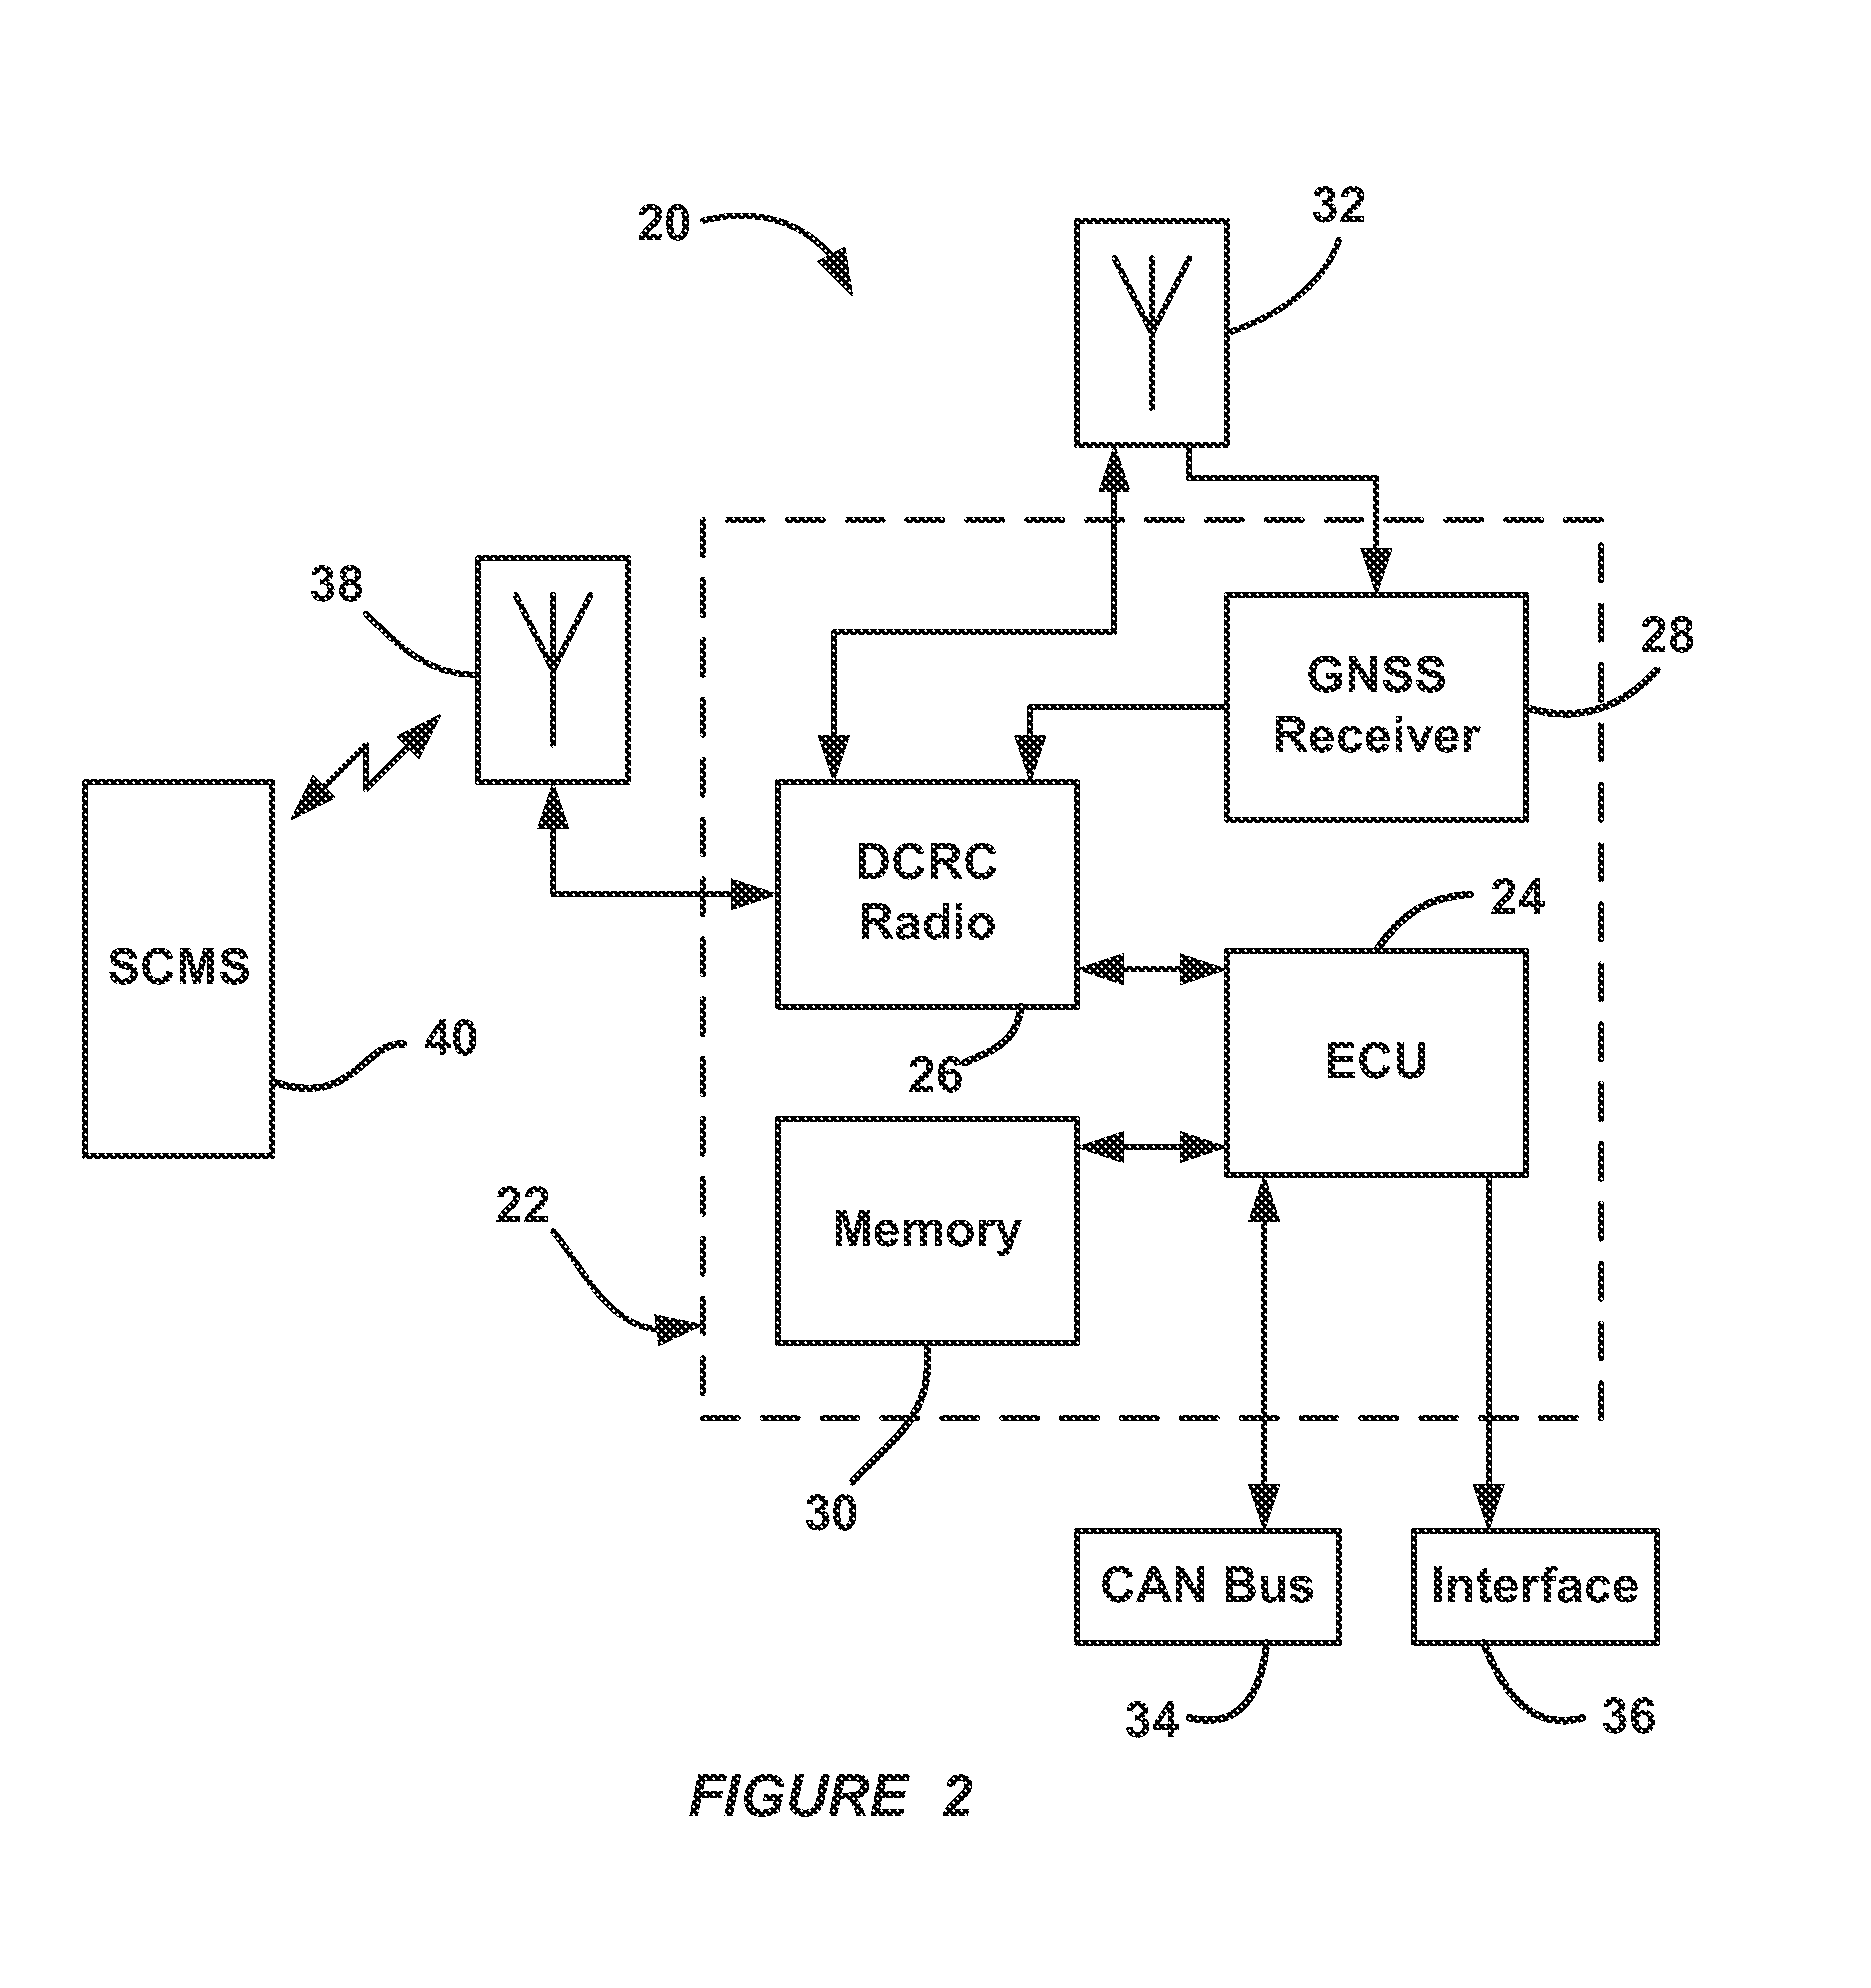 Methods of operation for plug-in wireless safety device